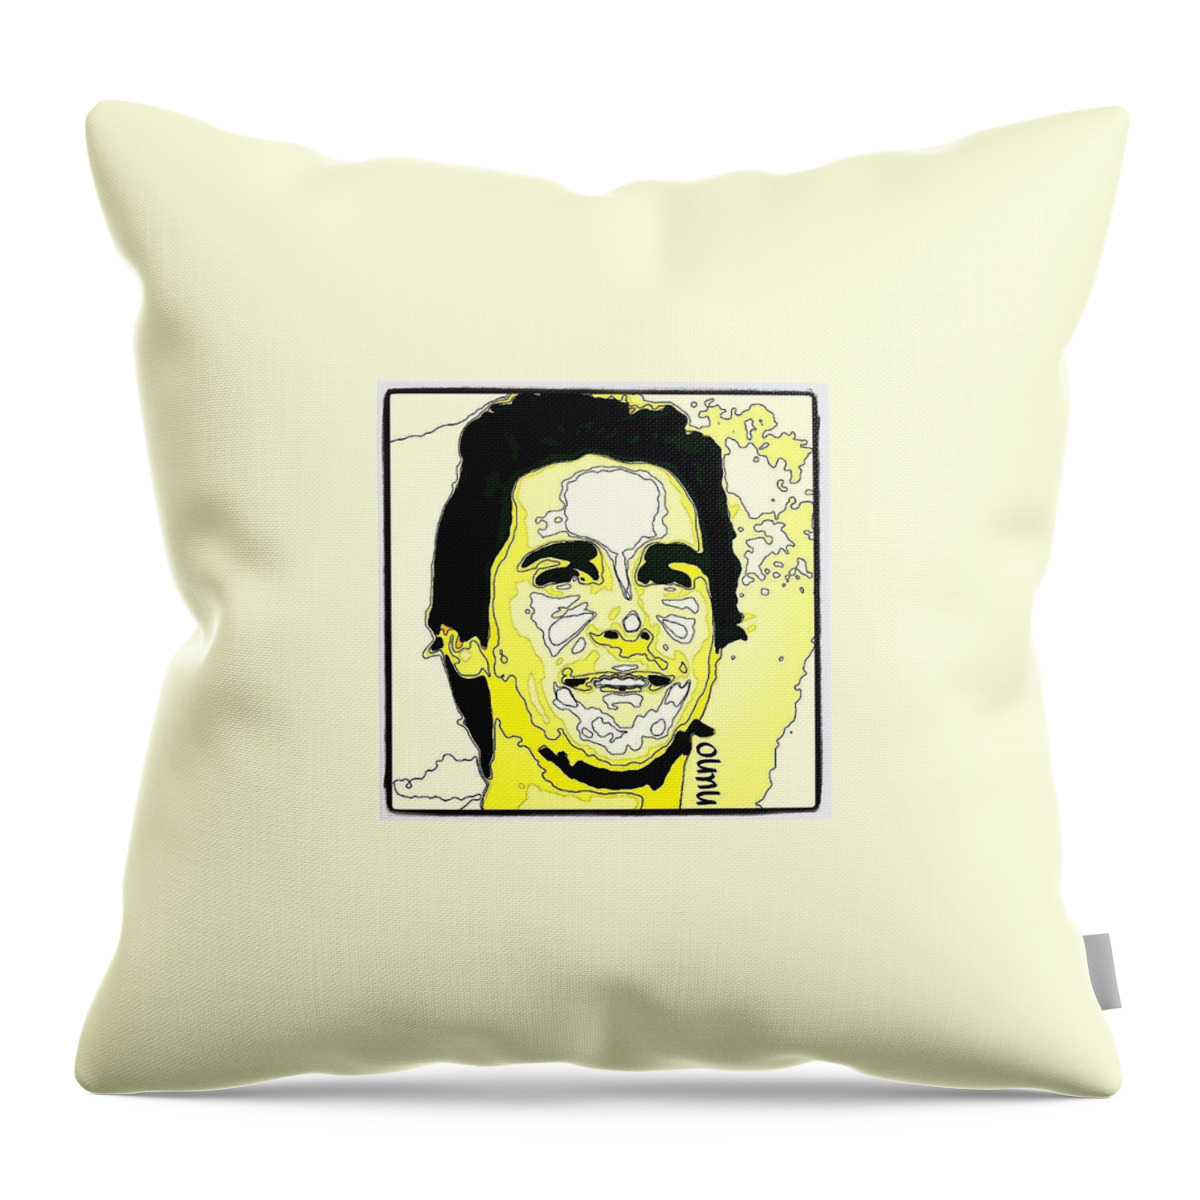 Christian Bale Throw Pillow featuring the photograph Christian Bale by Nuno Marques